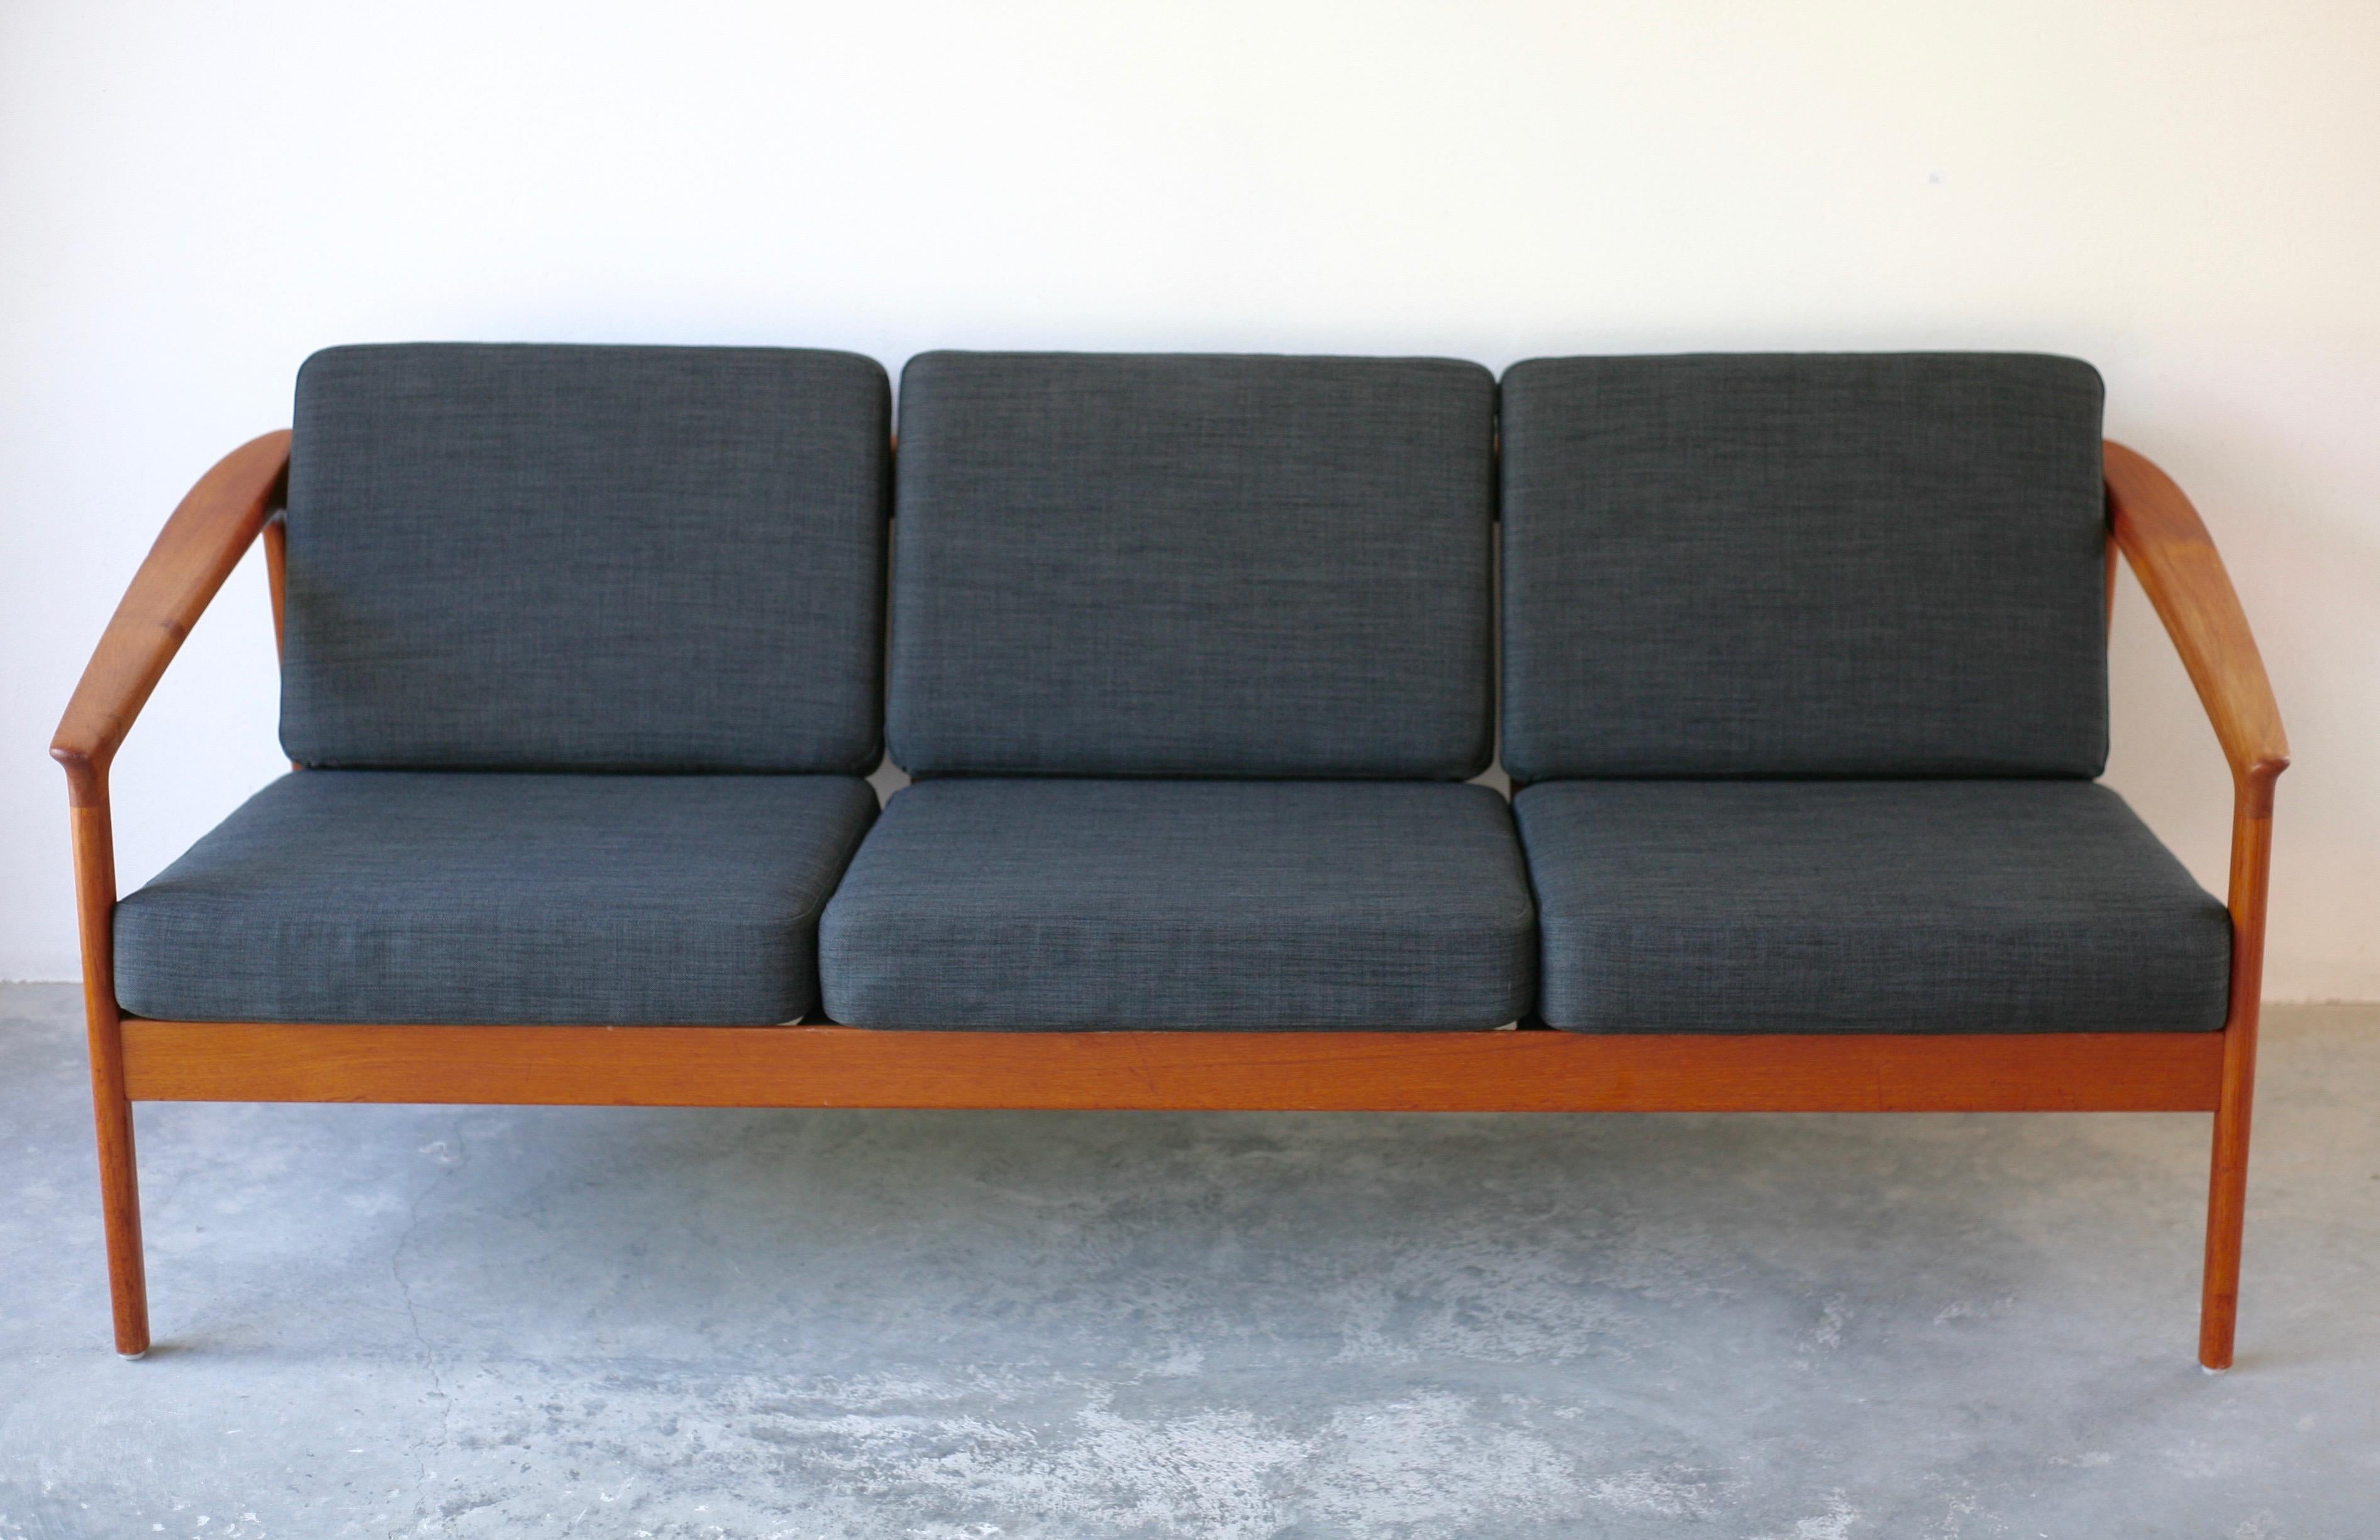 Teak sofa from the series Monterey designed by Folke Ohlsson in the early 1960s. This item manufactured in 1963 by Bodafors in Sweden. Newly upholstered cushions and new Fagas rubber bands throughout. Excellent condition with an exceptional design